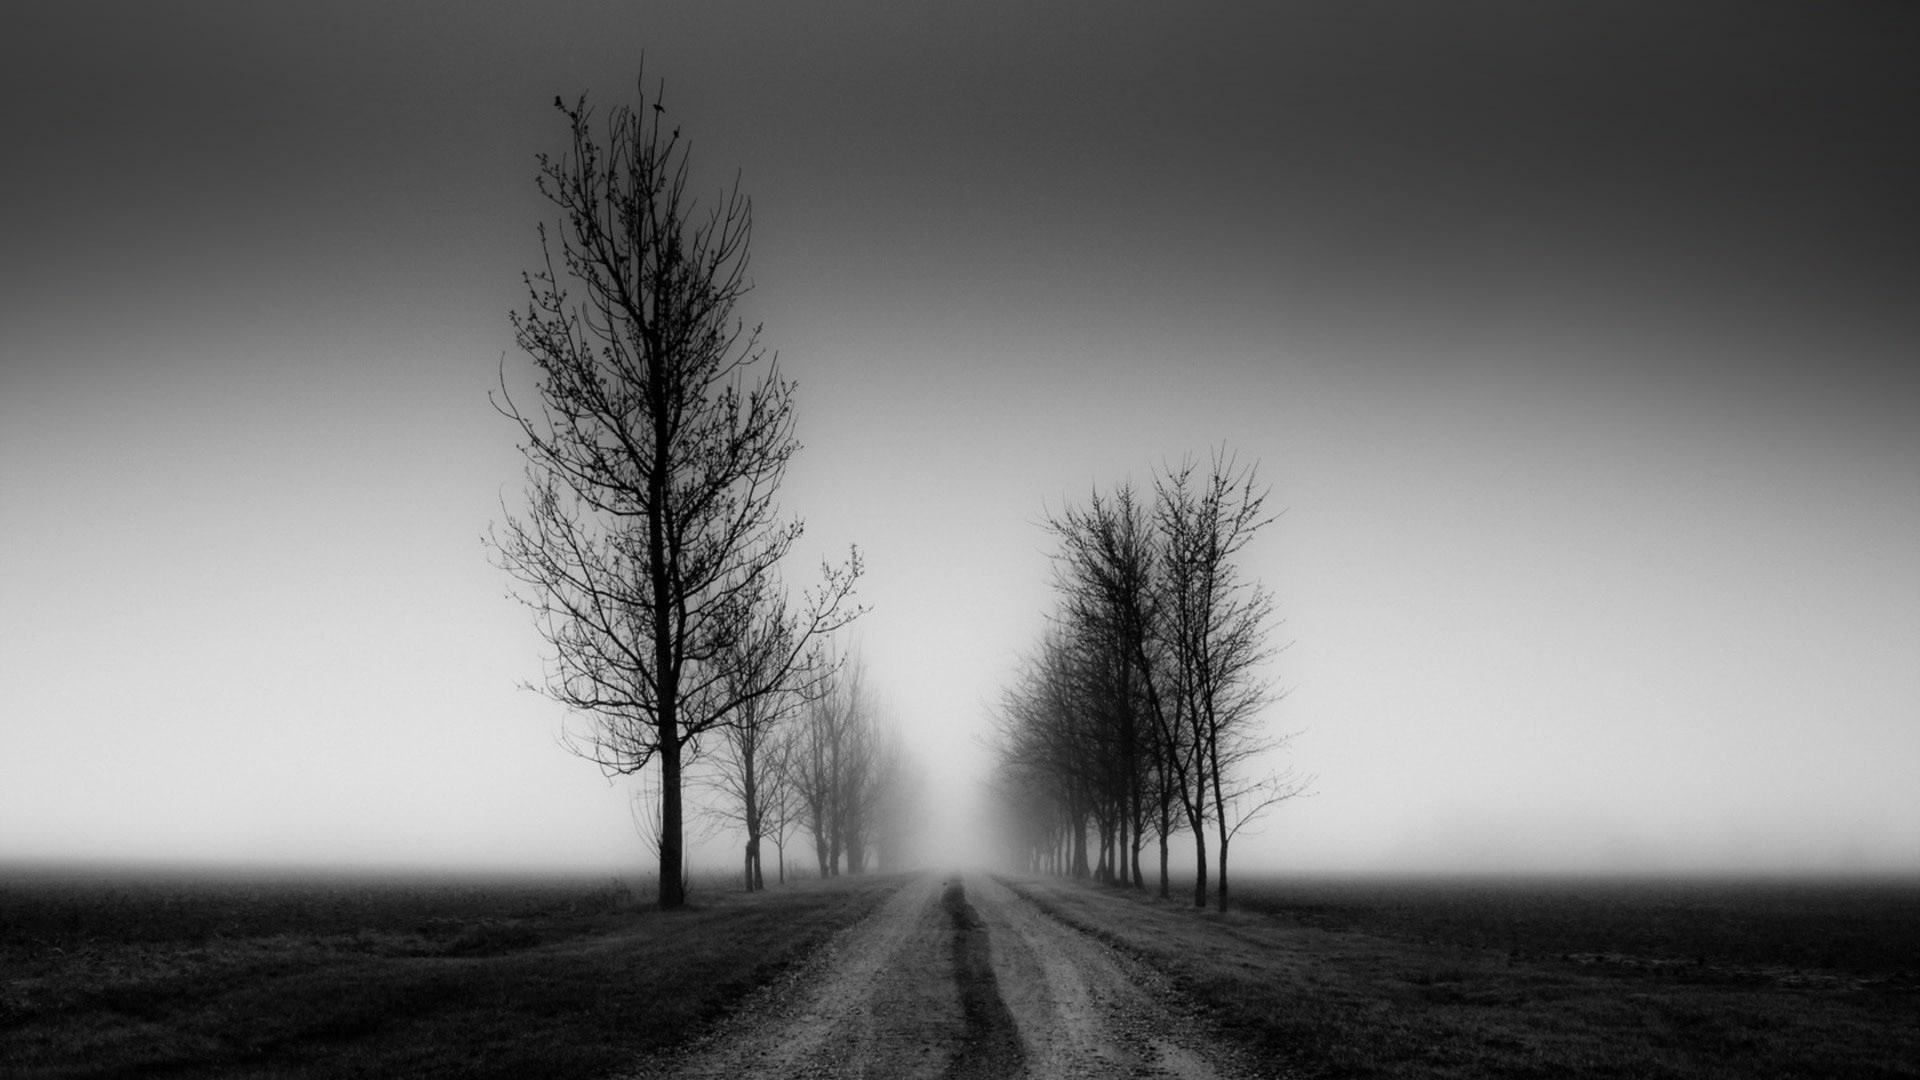 Beautiful Nature Black and White, fog, tree, direction, the way forward